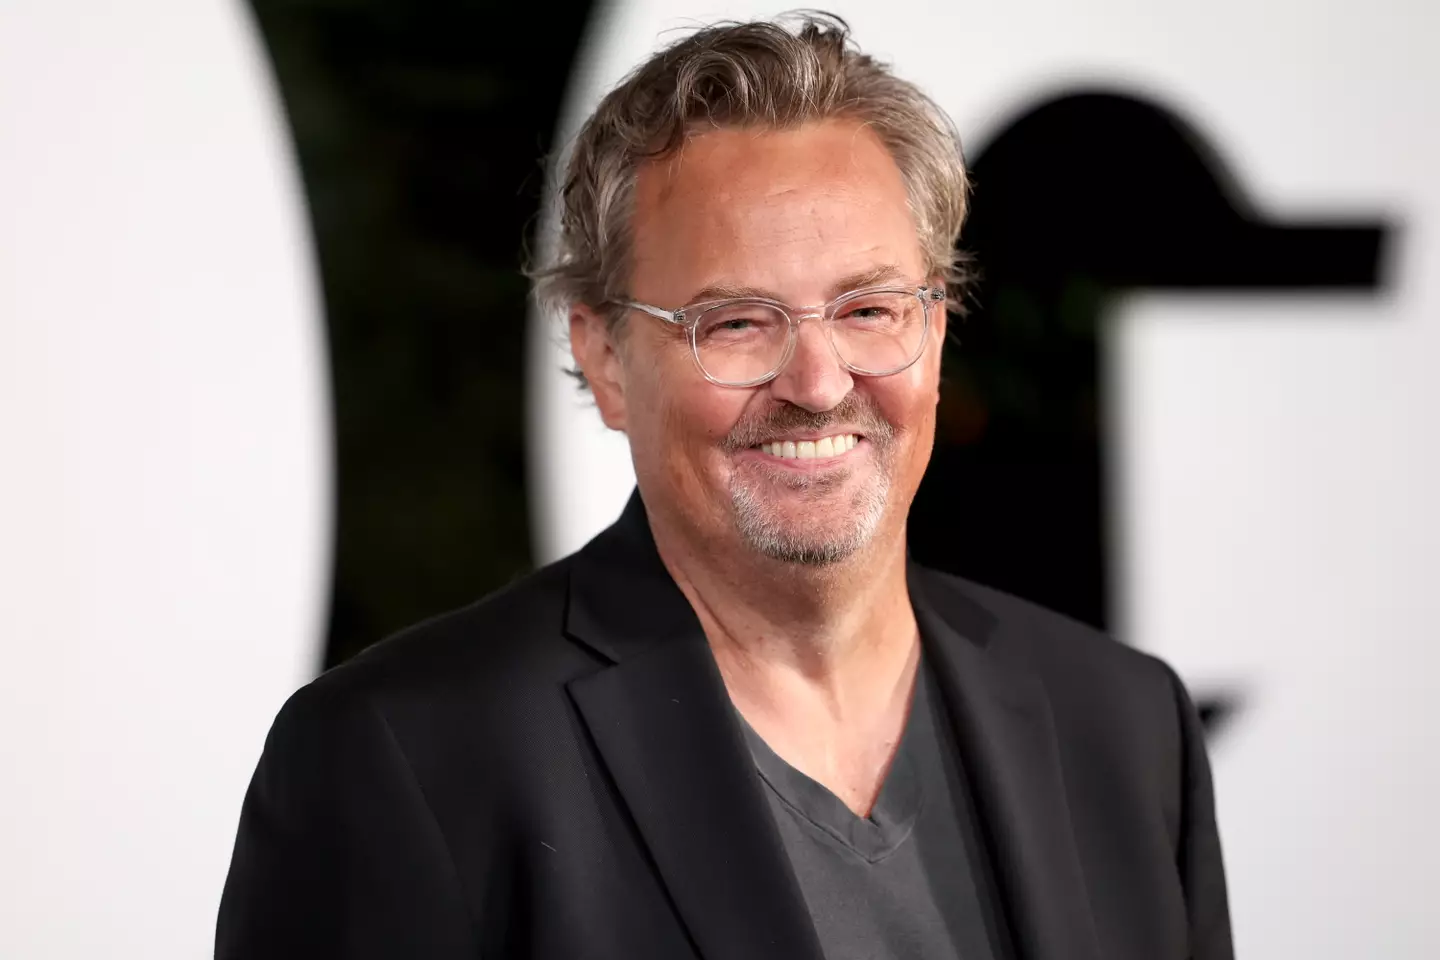 Friends star Matthew Perry died in October.